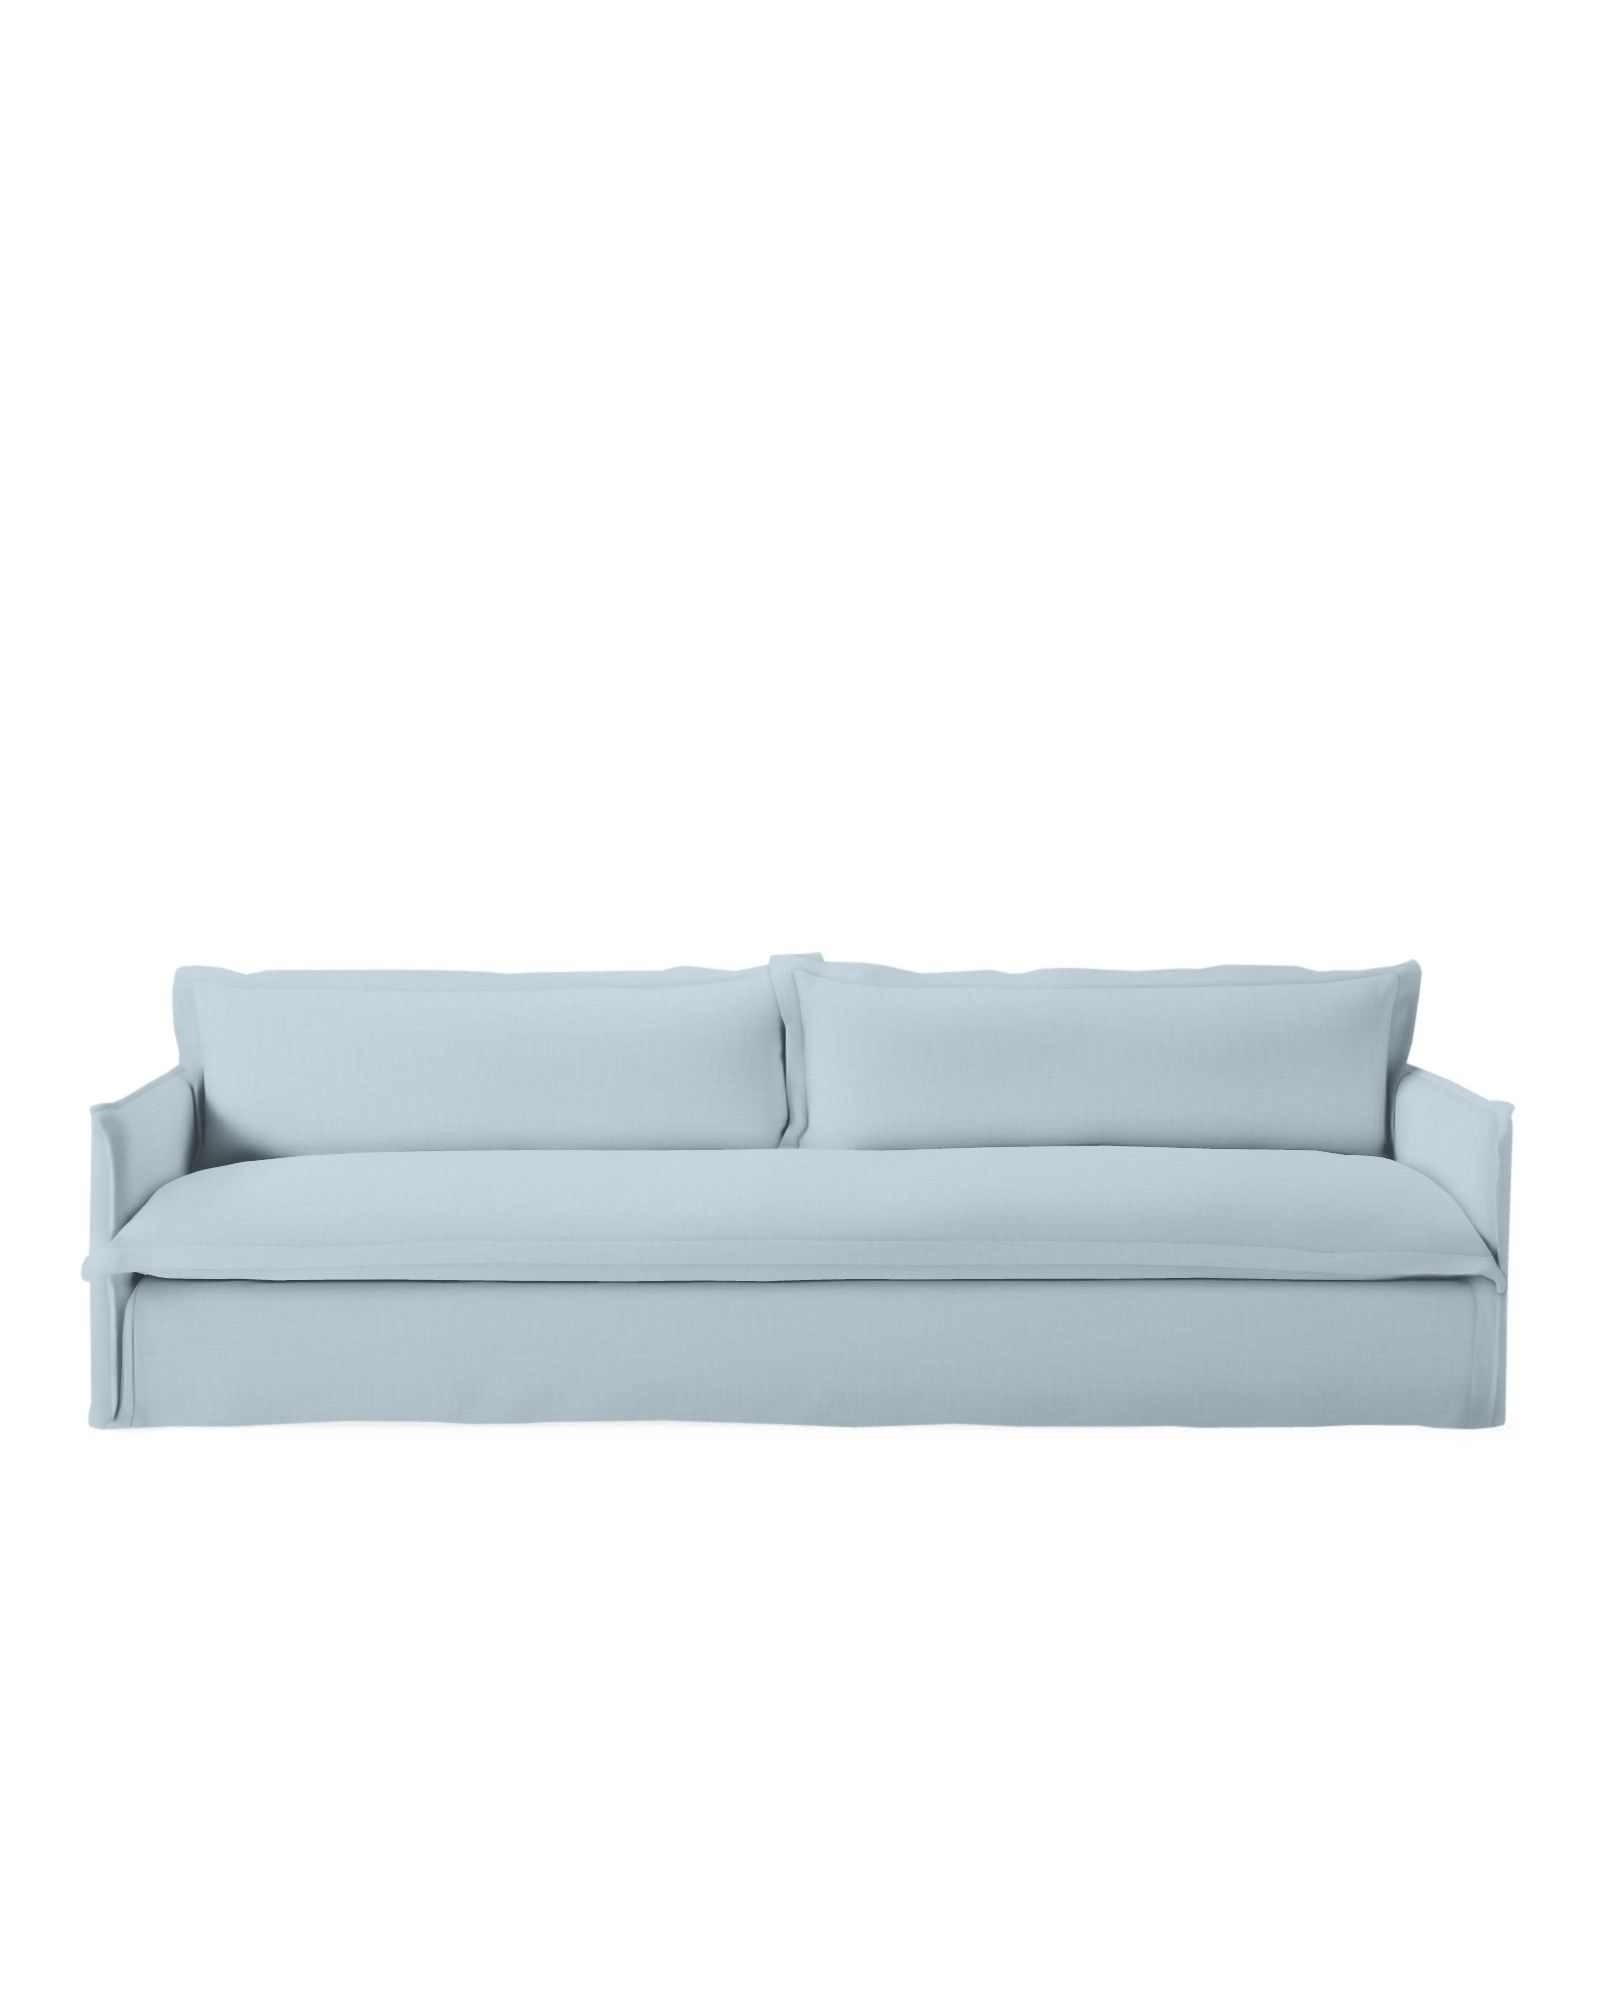 Beach House Sofa | Serena and Lily